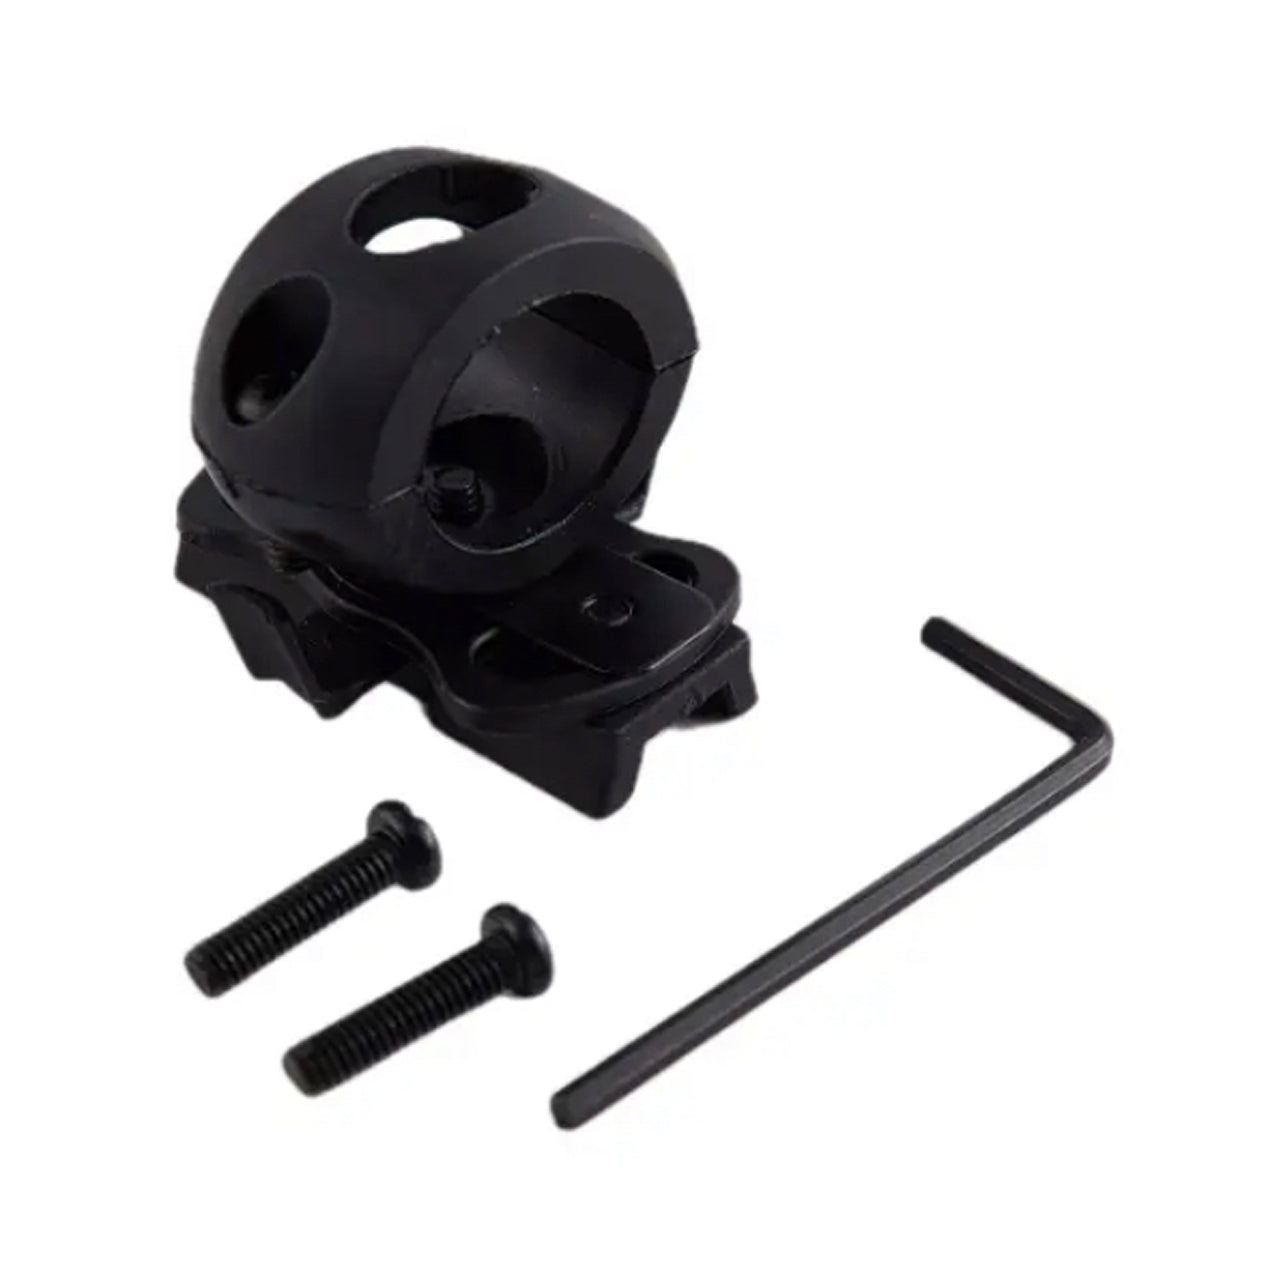 This Tactical Torch Holder is engineered for FAST helmet rails, letting you attach or detach lights with intense speed for varied helmet utilization. Experience instant mounting on the side of your helmet whenever you need it! www.defenceqstore.com.au